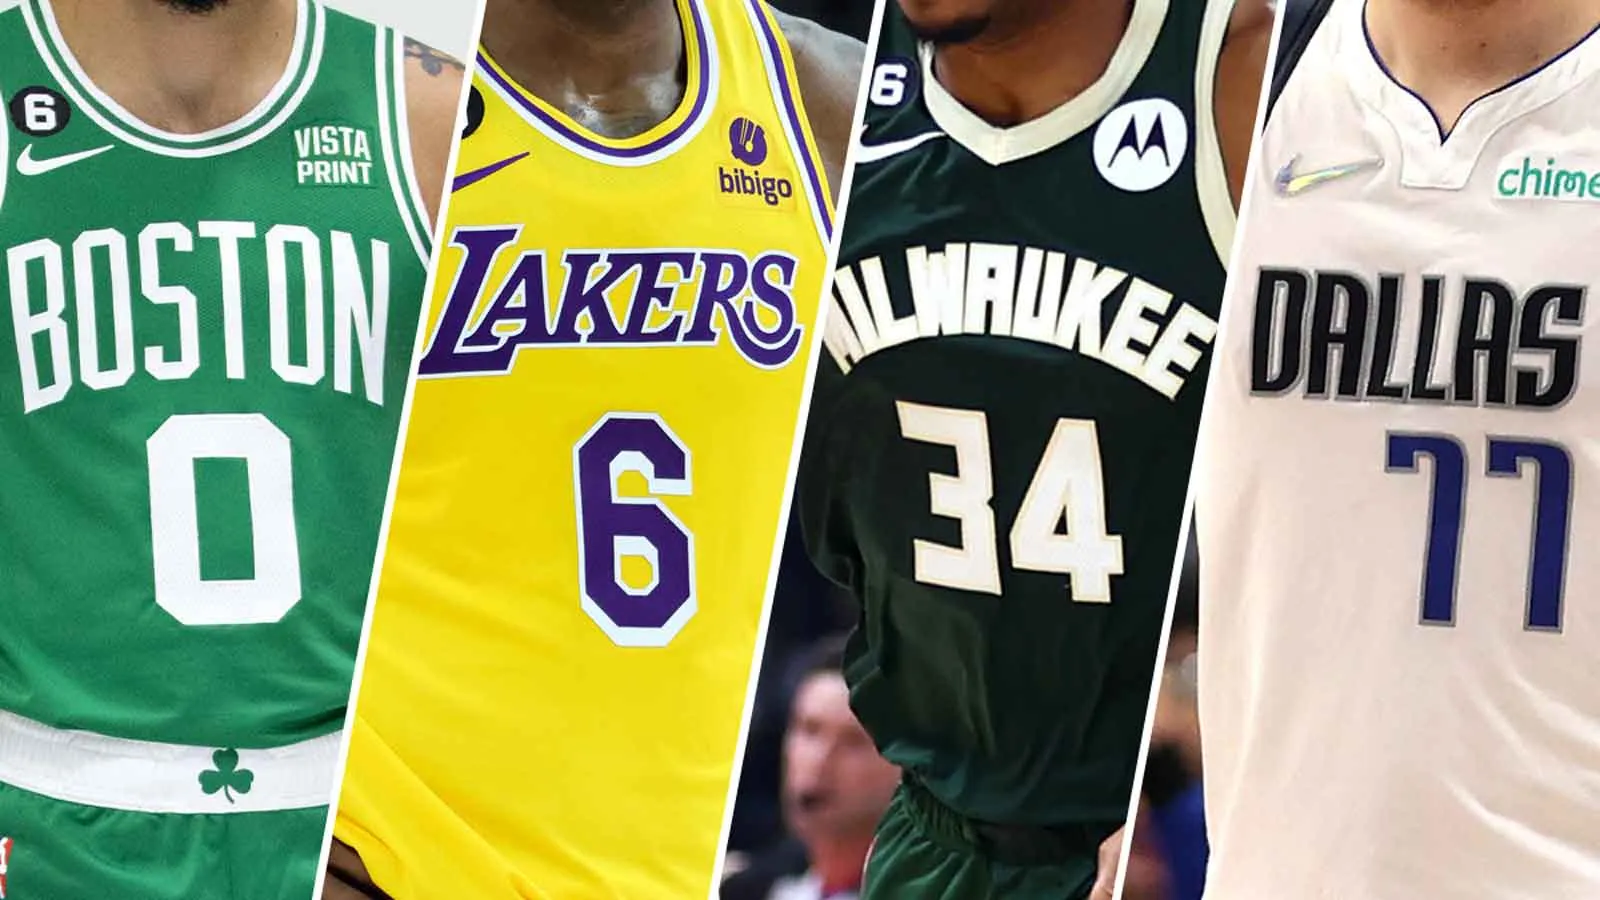 Dominant Digits -- The 10 most popular jersey numbers among